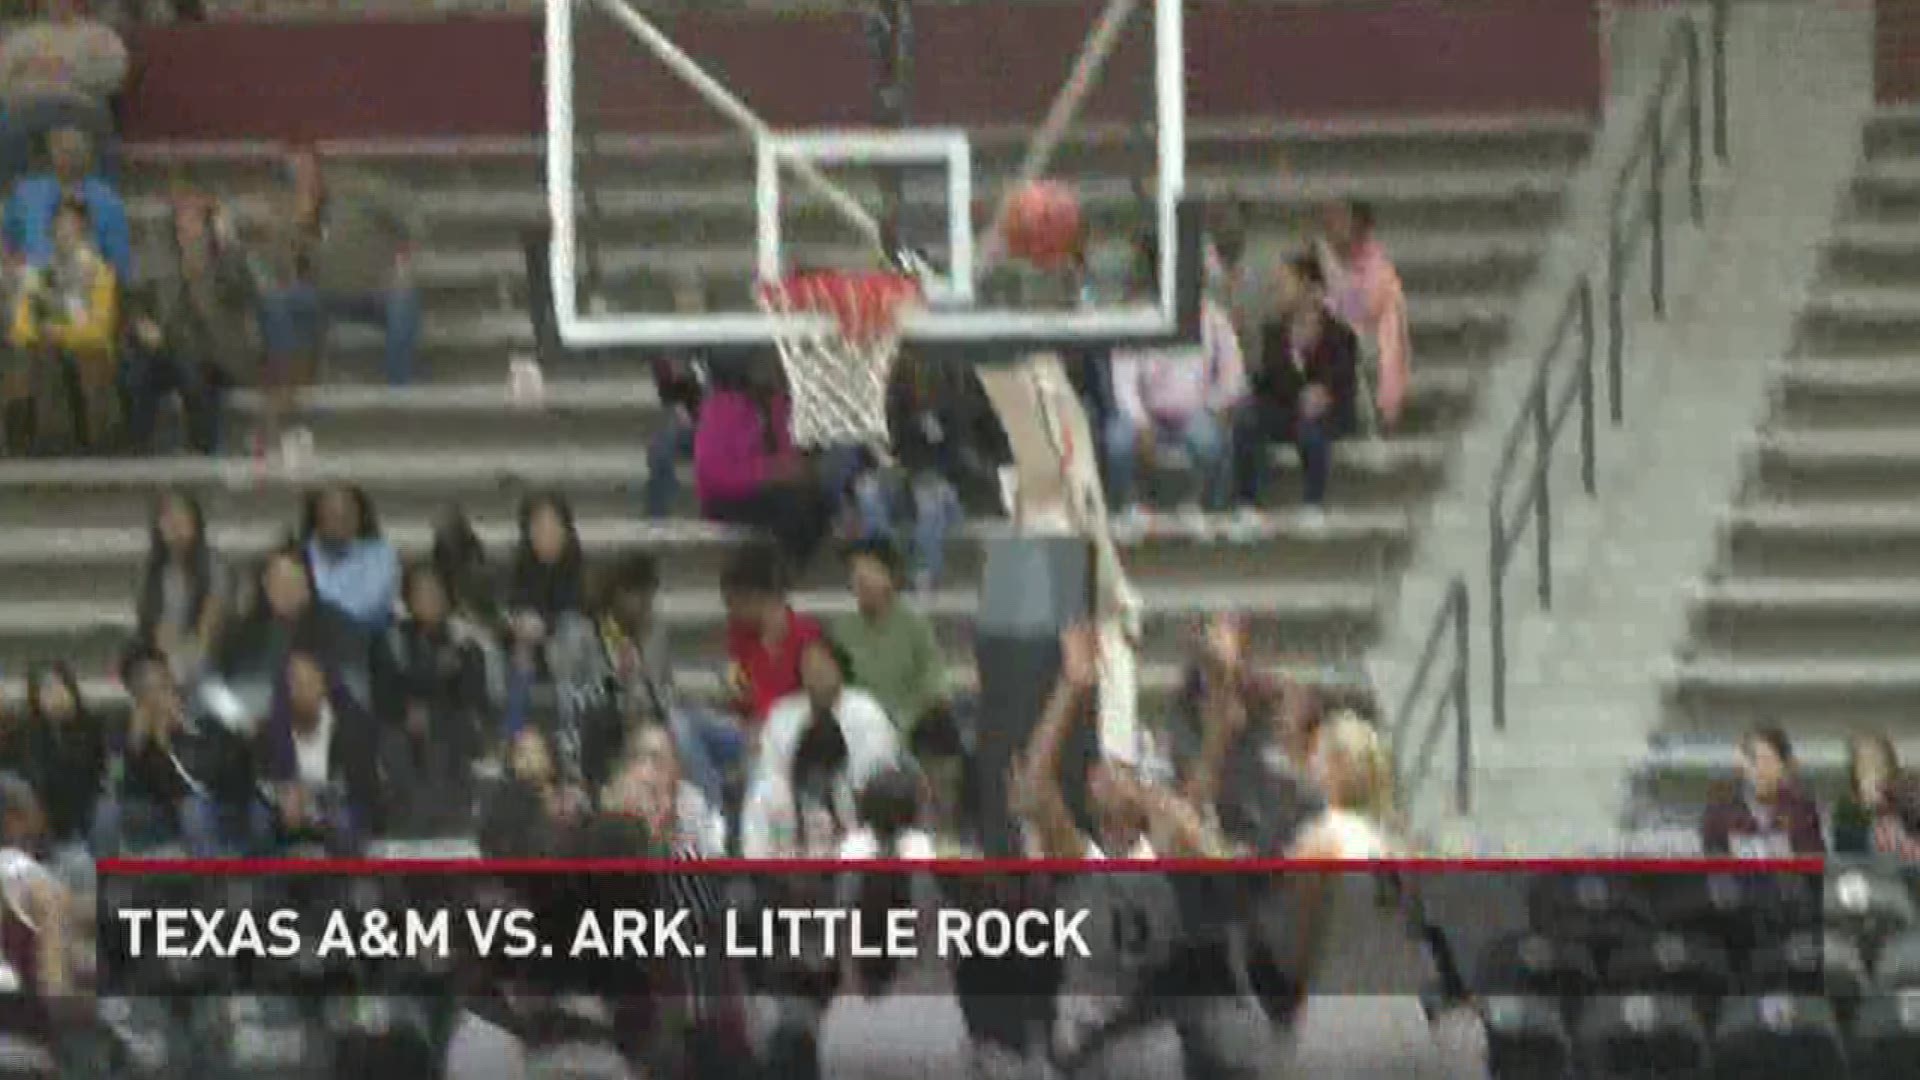 The Texas A&M women's basketball team overcame a halftime deficit to beat Arkansas Little Rock and stay unbeaten on the year.